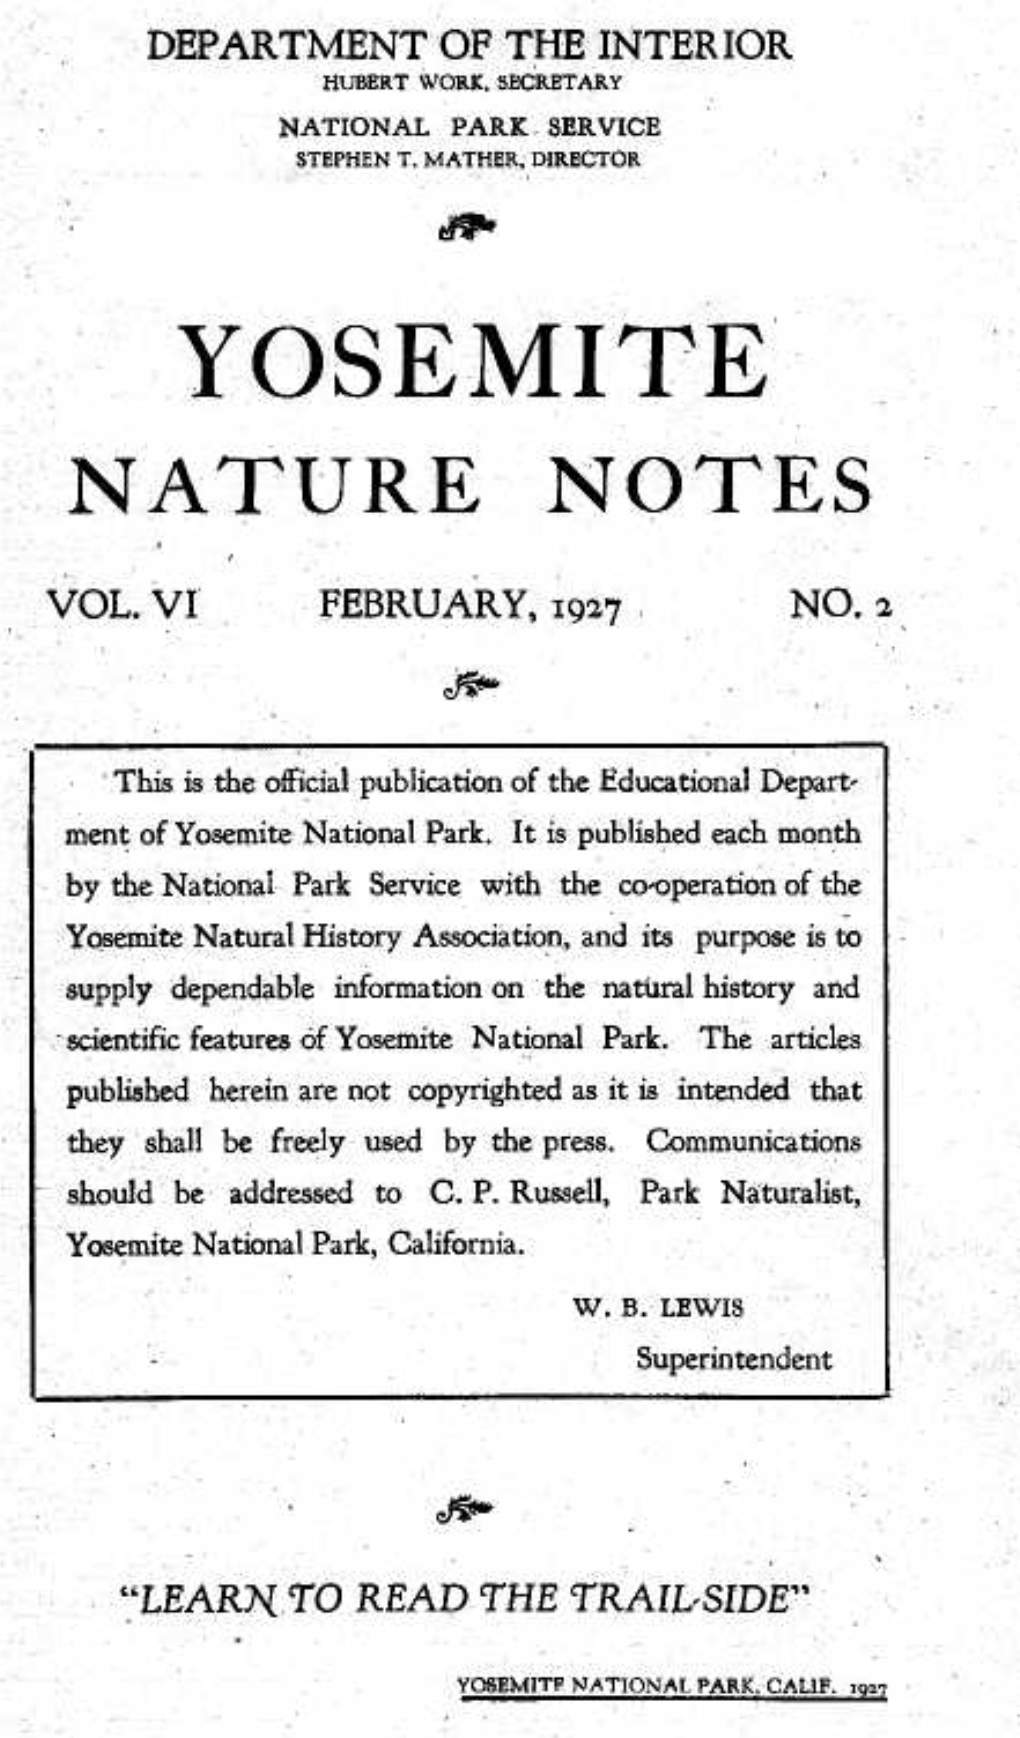 In Yosemite Nature Notes